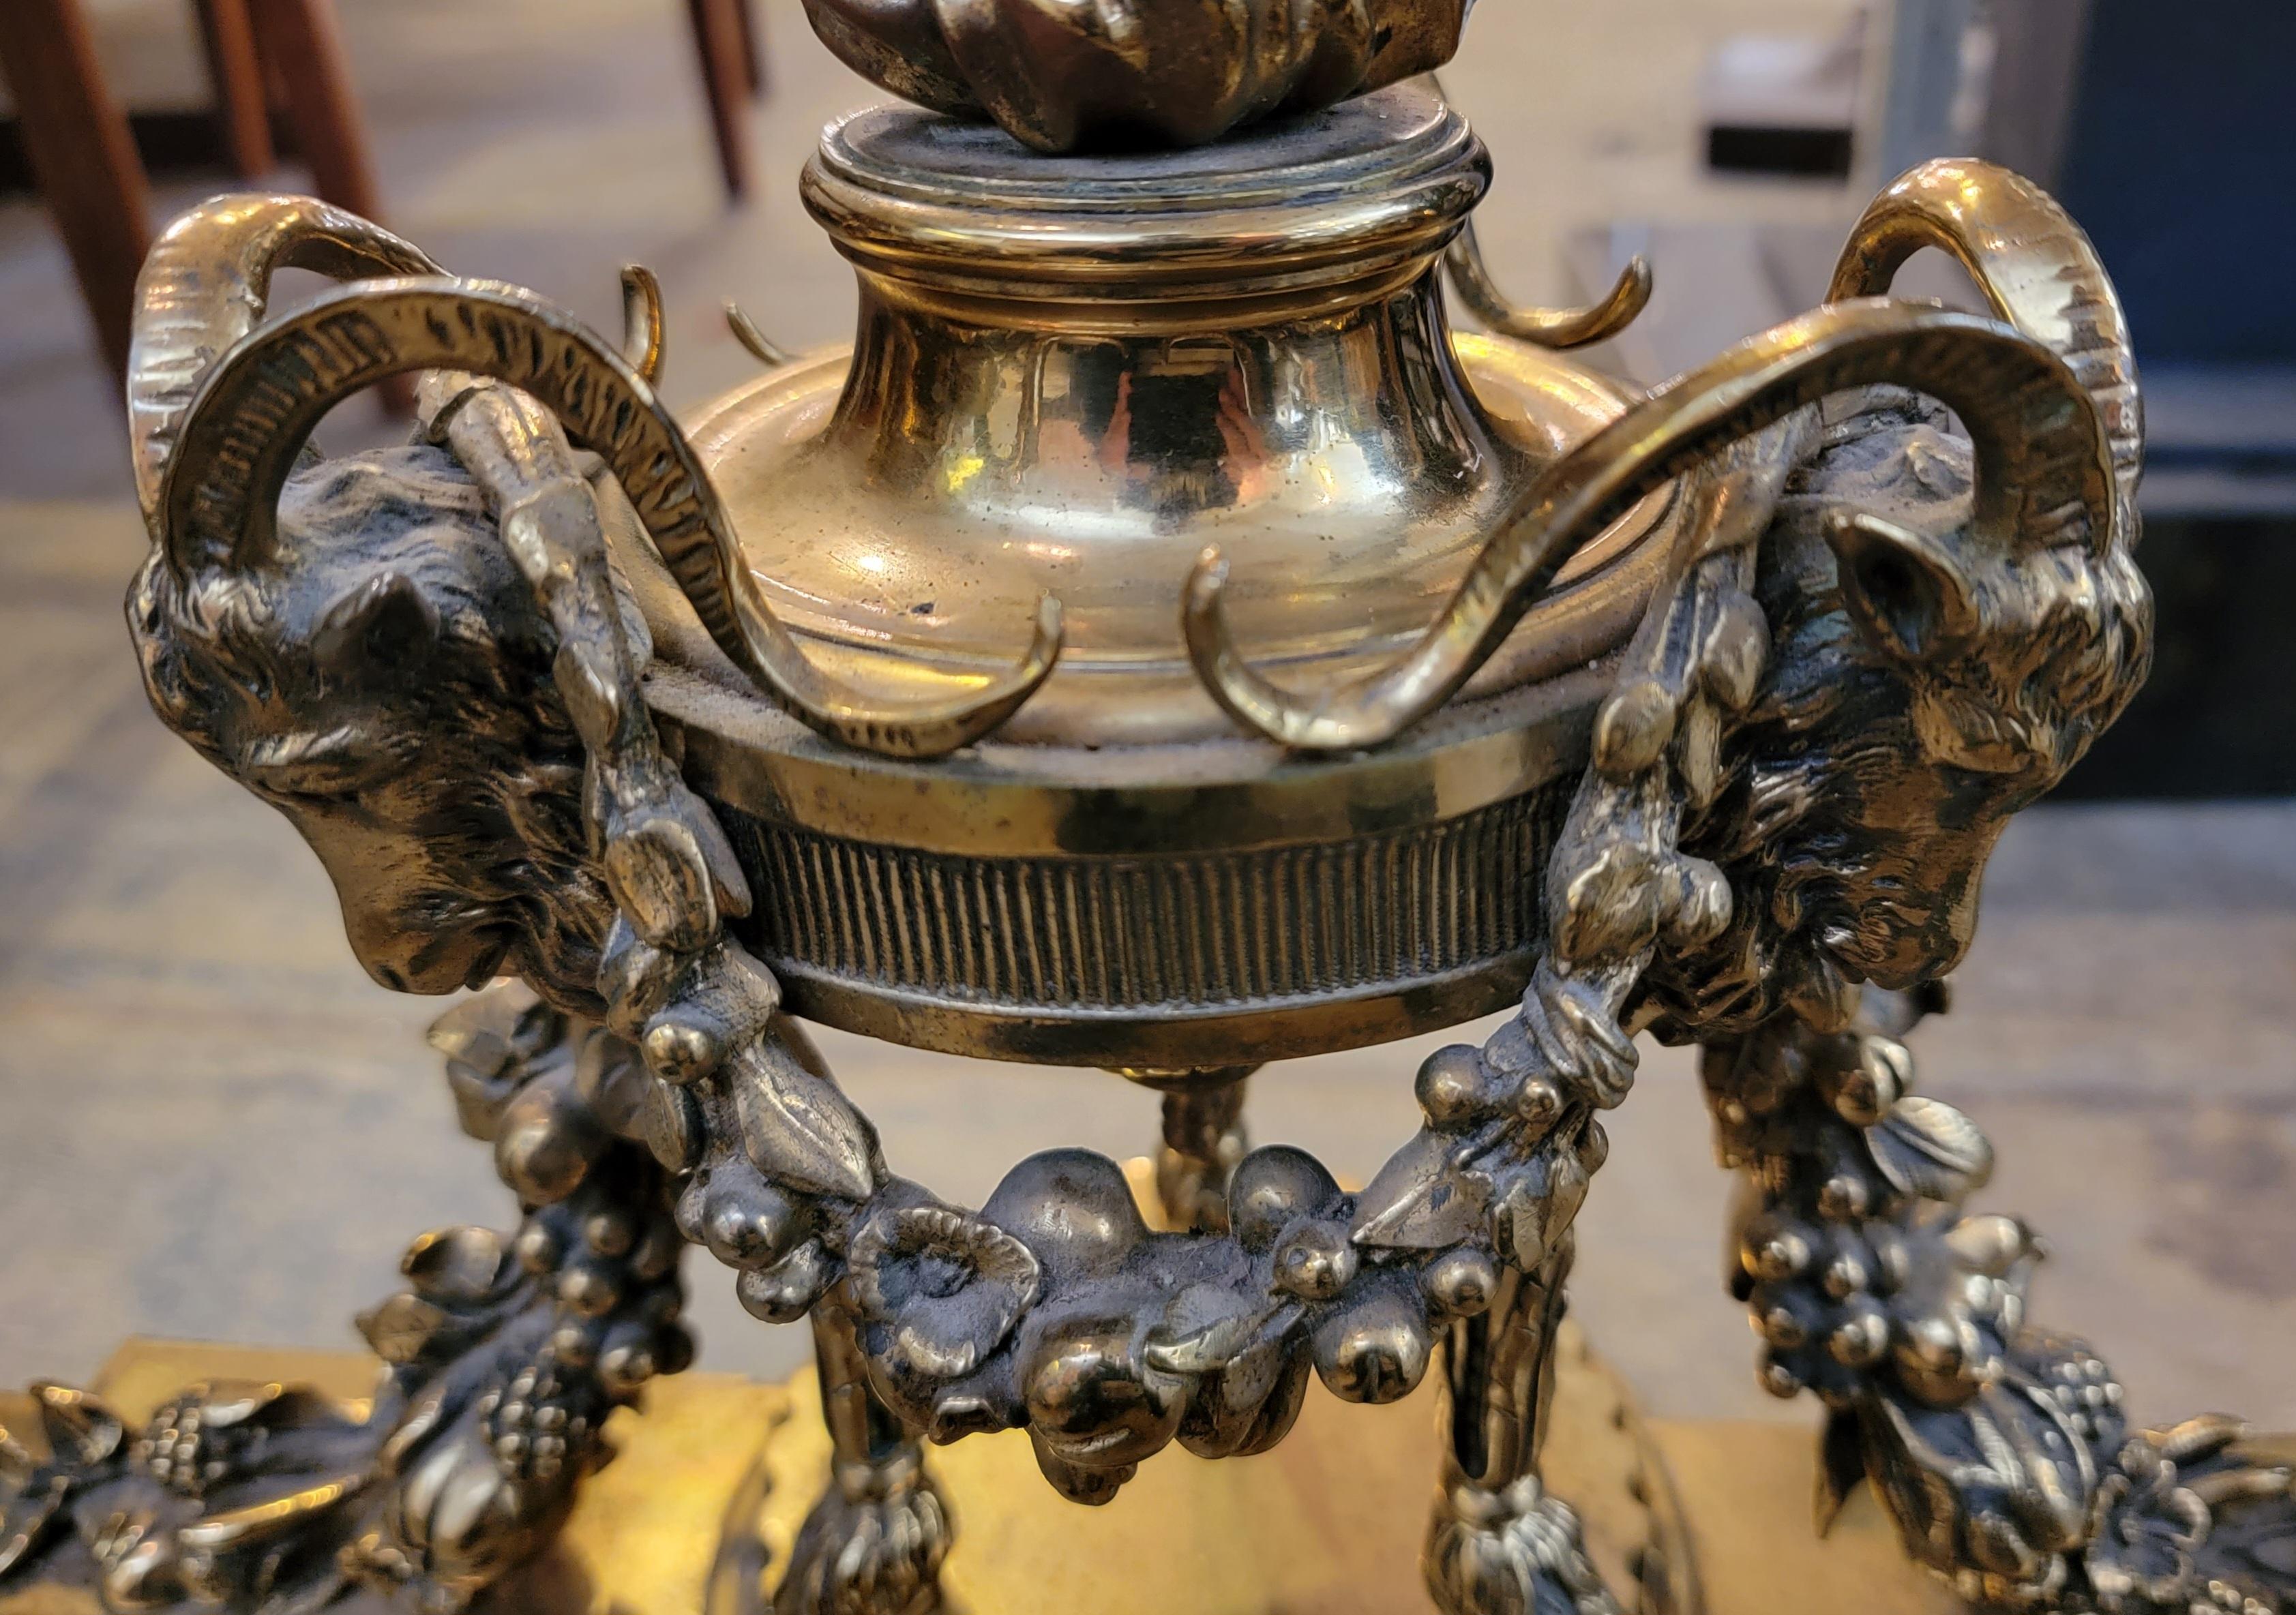 PAIR OF BRASS LOUIS XVI-STYLE CHENETS. Wonderful design with rams on the top portion were the bronze flames tower over the chenets. The ivy flows down to the main area of the bronze chenets to expose a facial figure in the center of teh entire